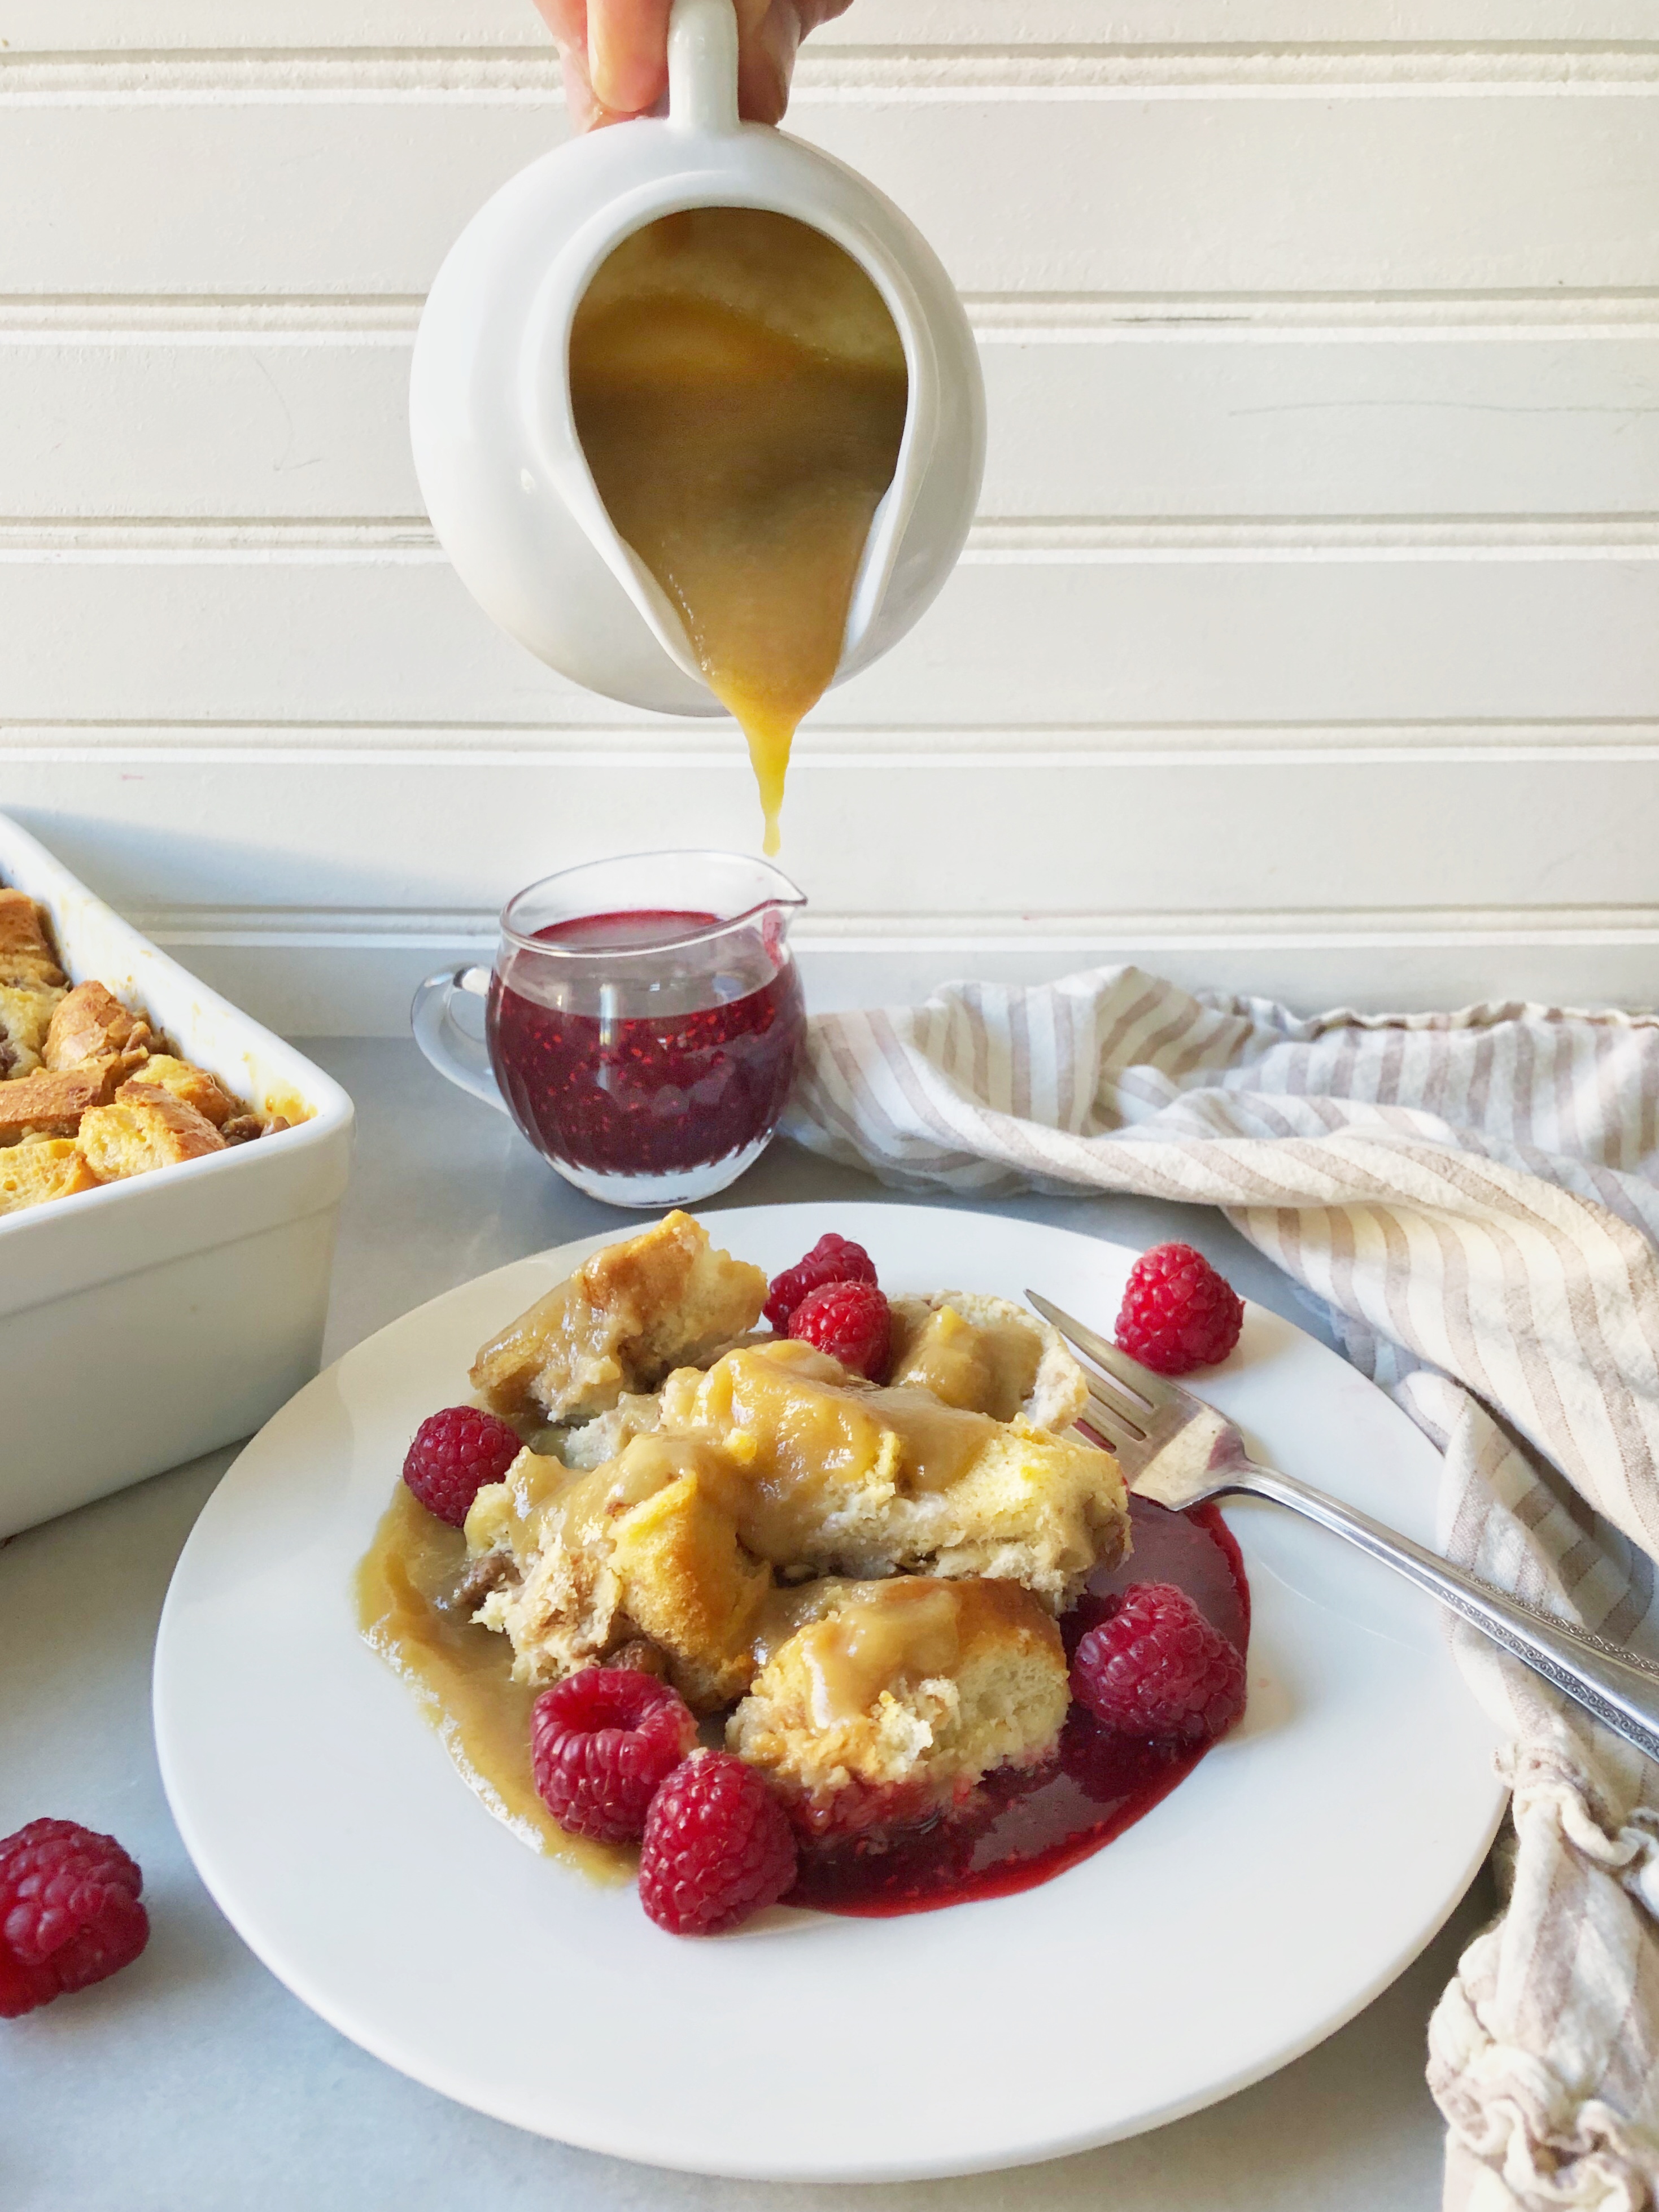 white chocolate bread pudding with raspberries and caramel sauce poured over it